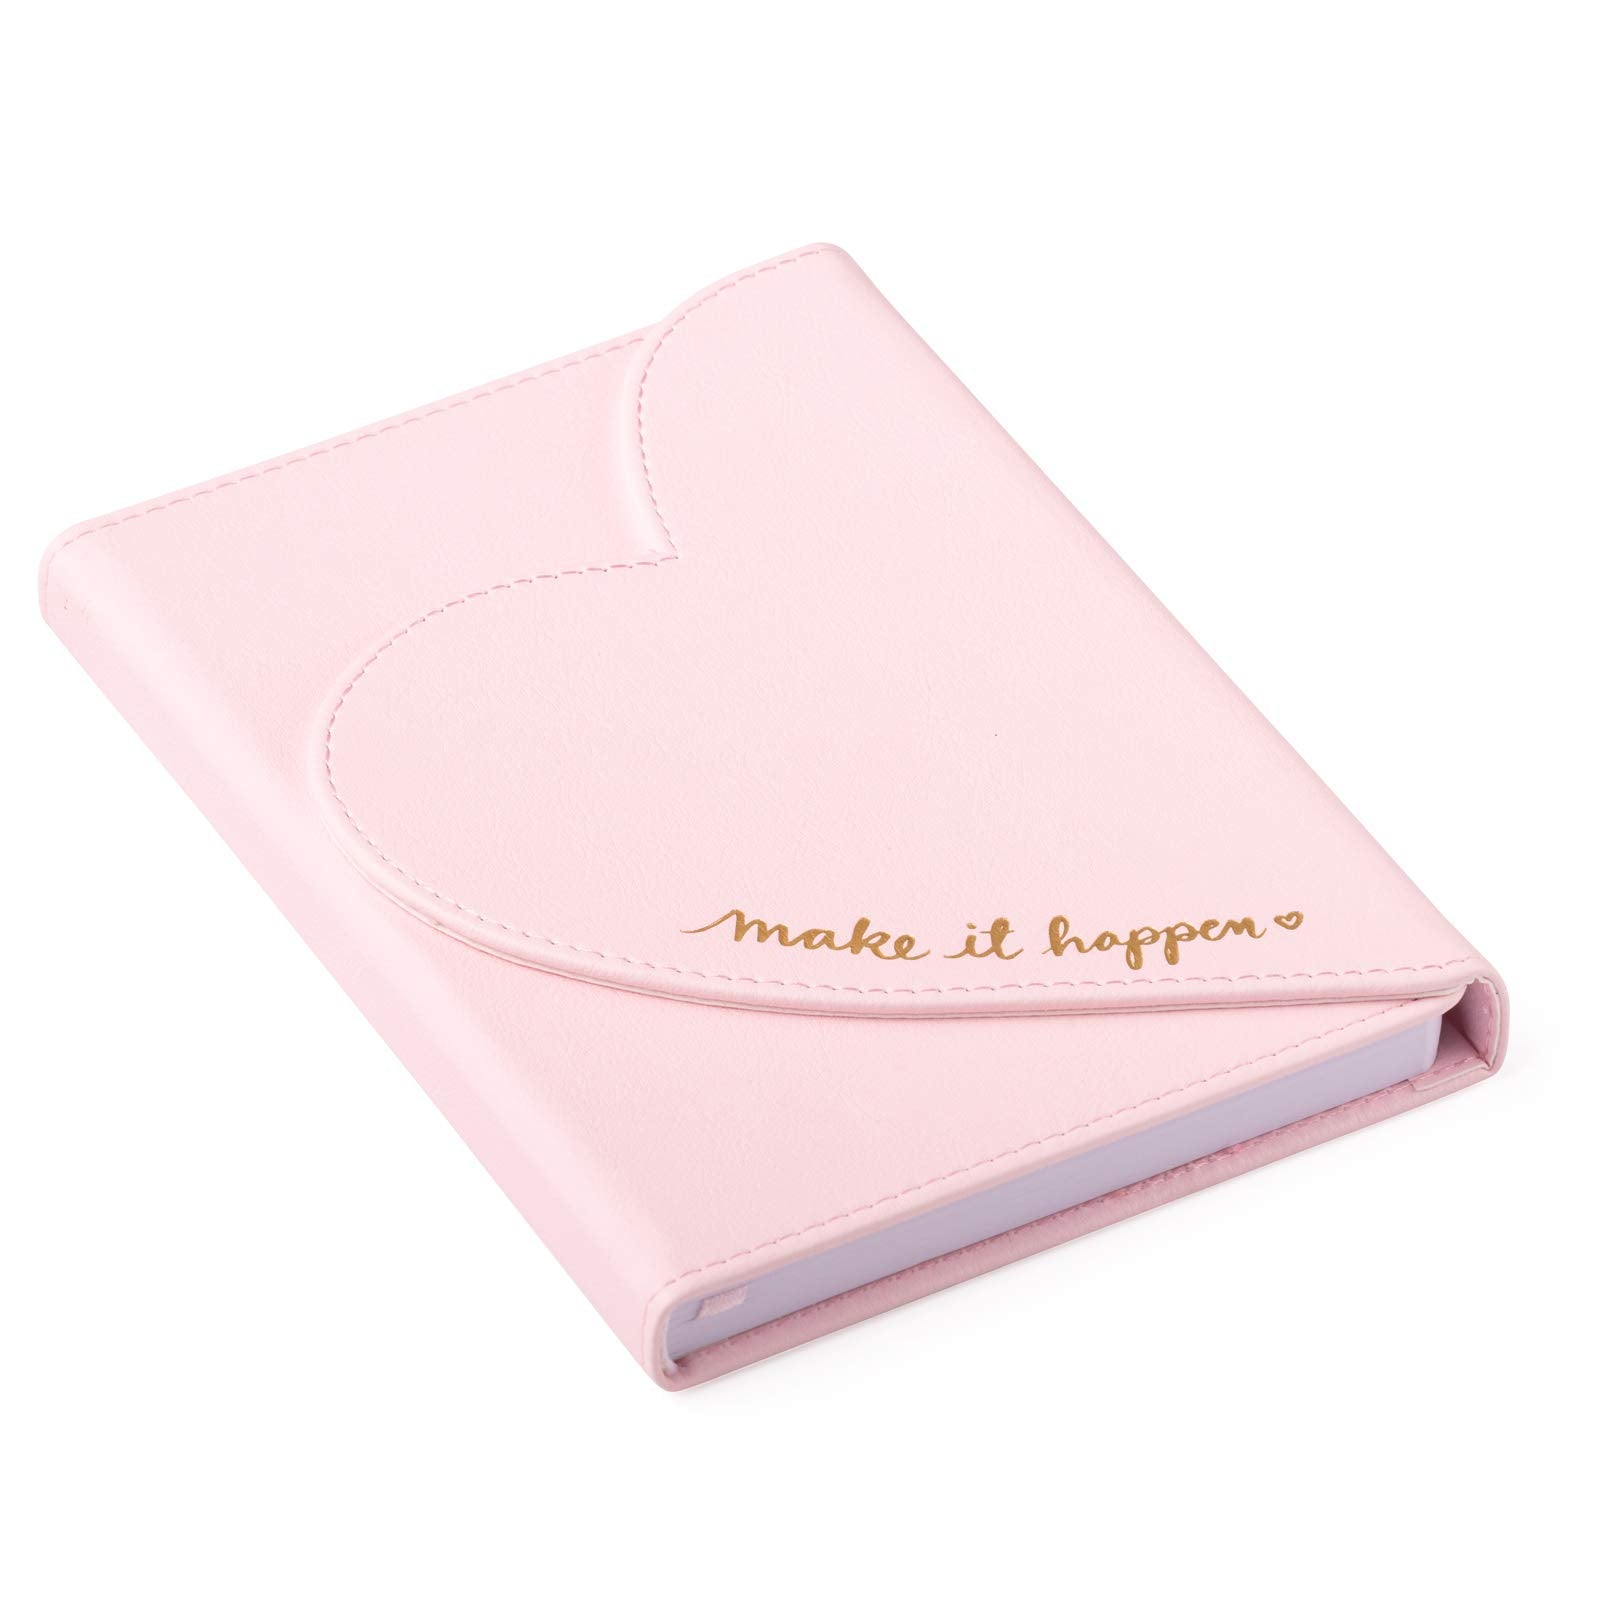 Close-up of Magnetic Heart Flap on Eccolo Dayna Lee Notebook